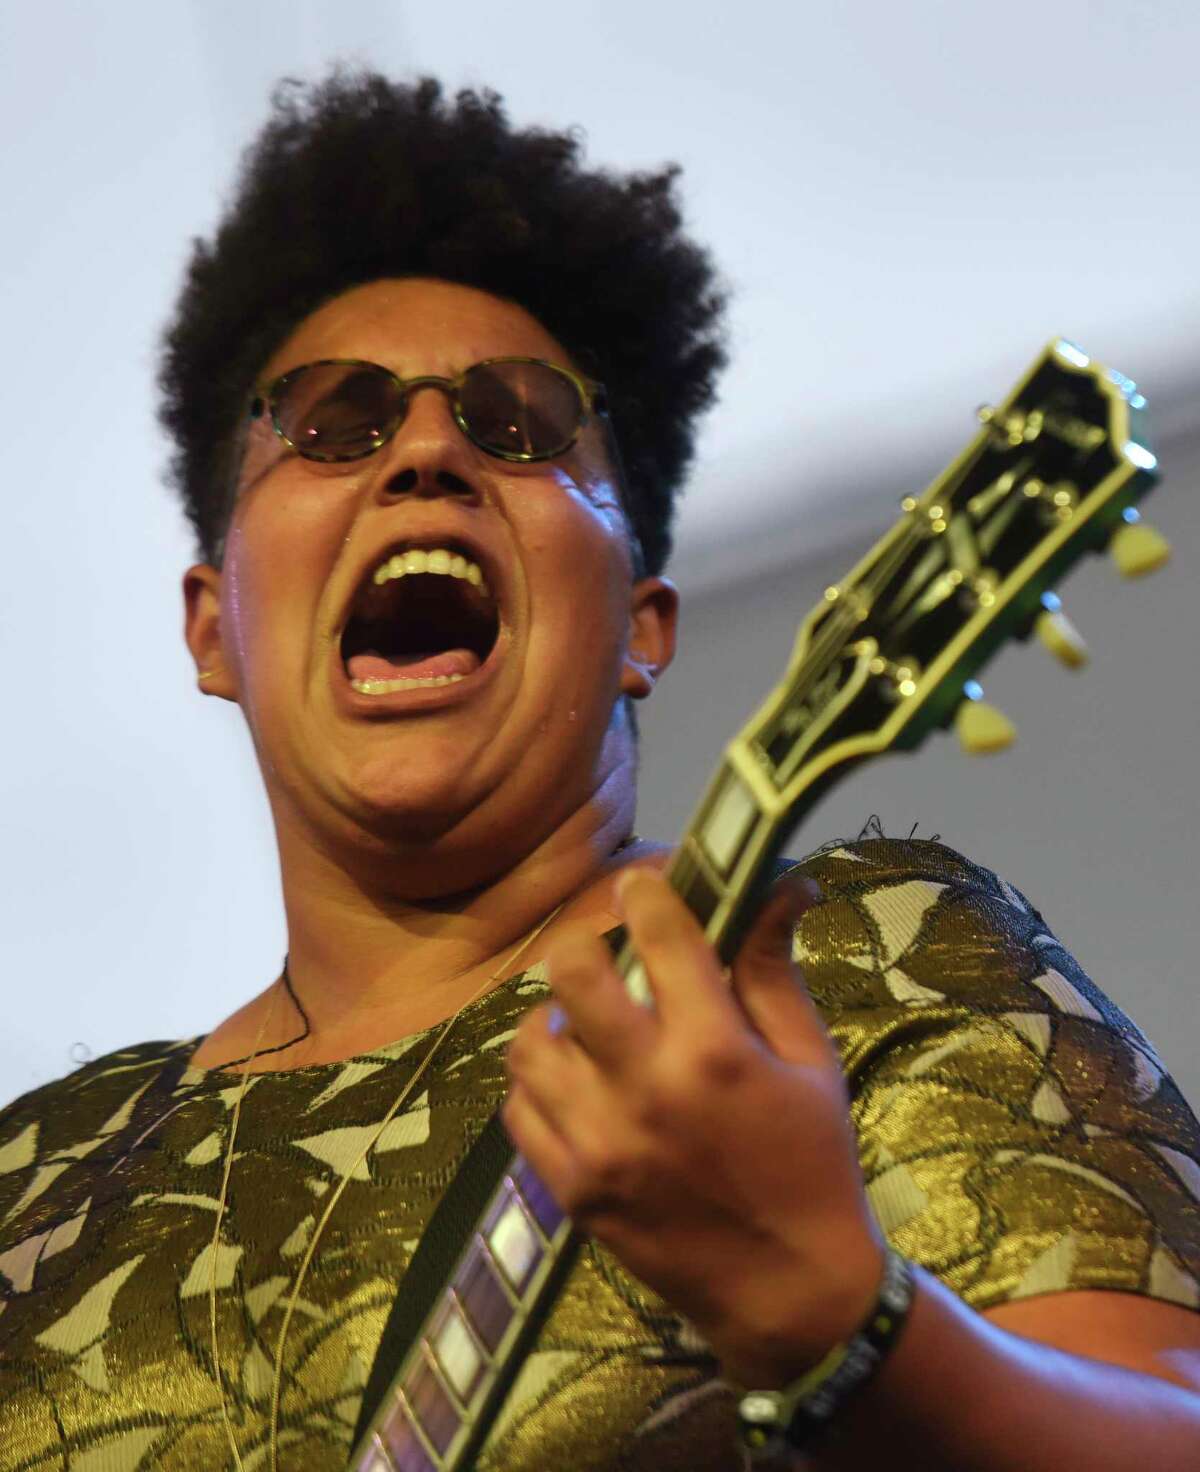 The Alabama Shakes perform at the 2017 Greenwich Town Party at Roger Sherman Baldwin Park in Greenwich, Conn. Saturday, May 27, 2017. The 2017 Town Party was headlined by classic jazz fusion group Steely Dan and American blues rock band Alabama Shakes. Several local bands also performed, with many activities for children and families and local food stands.